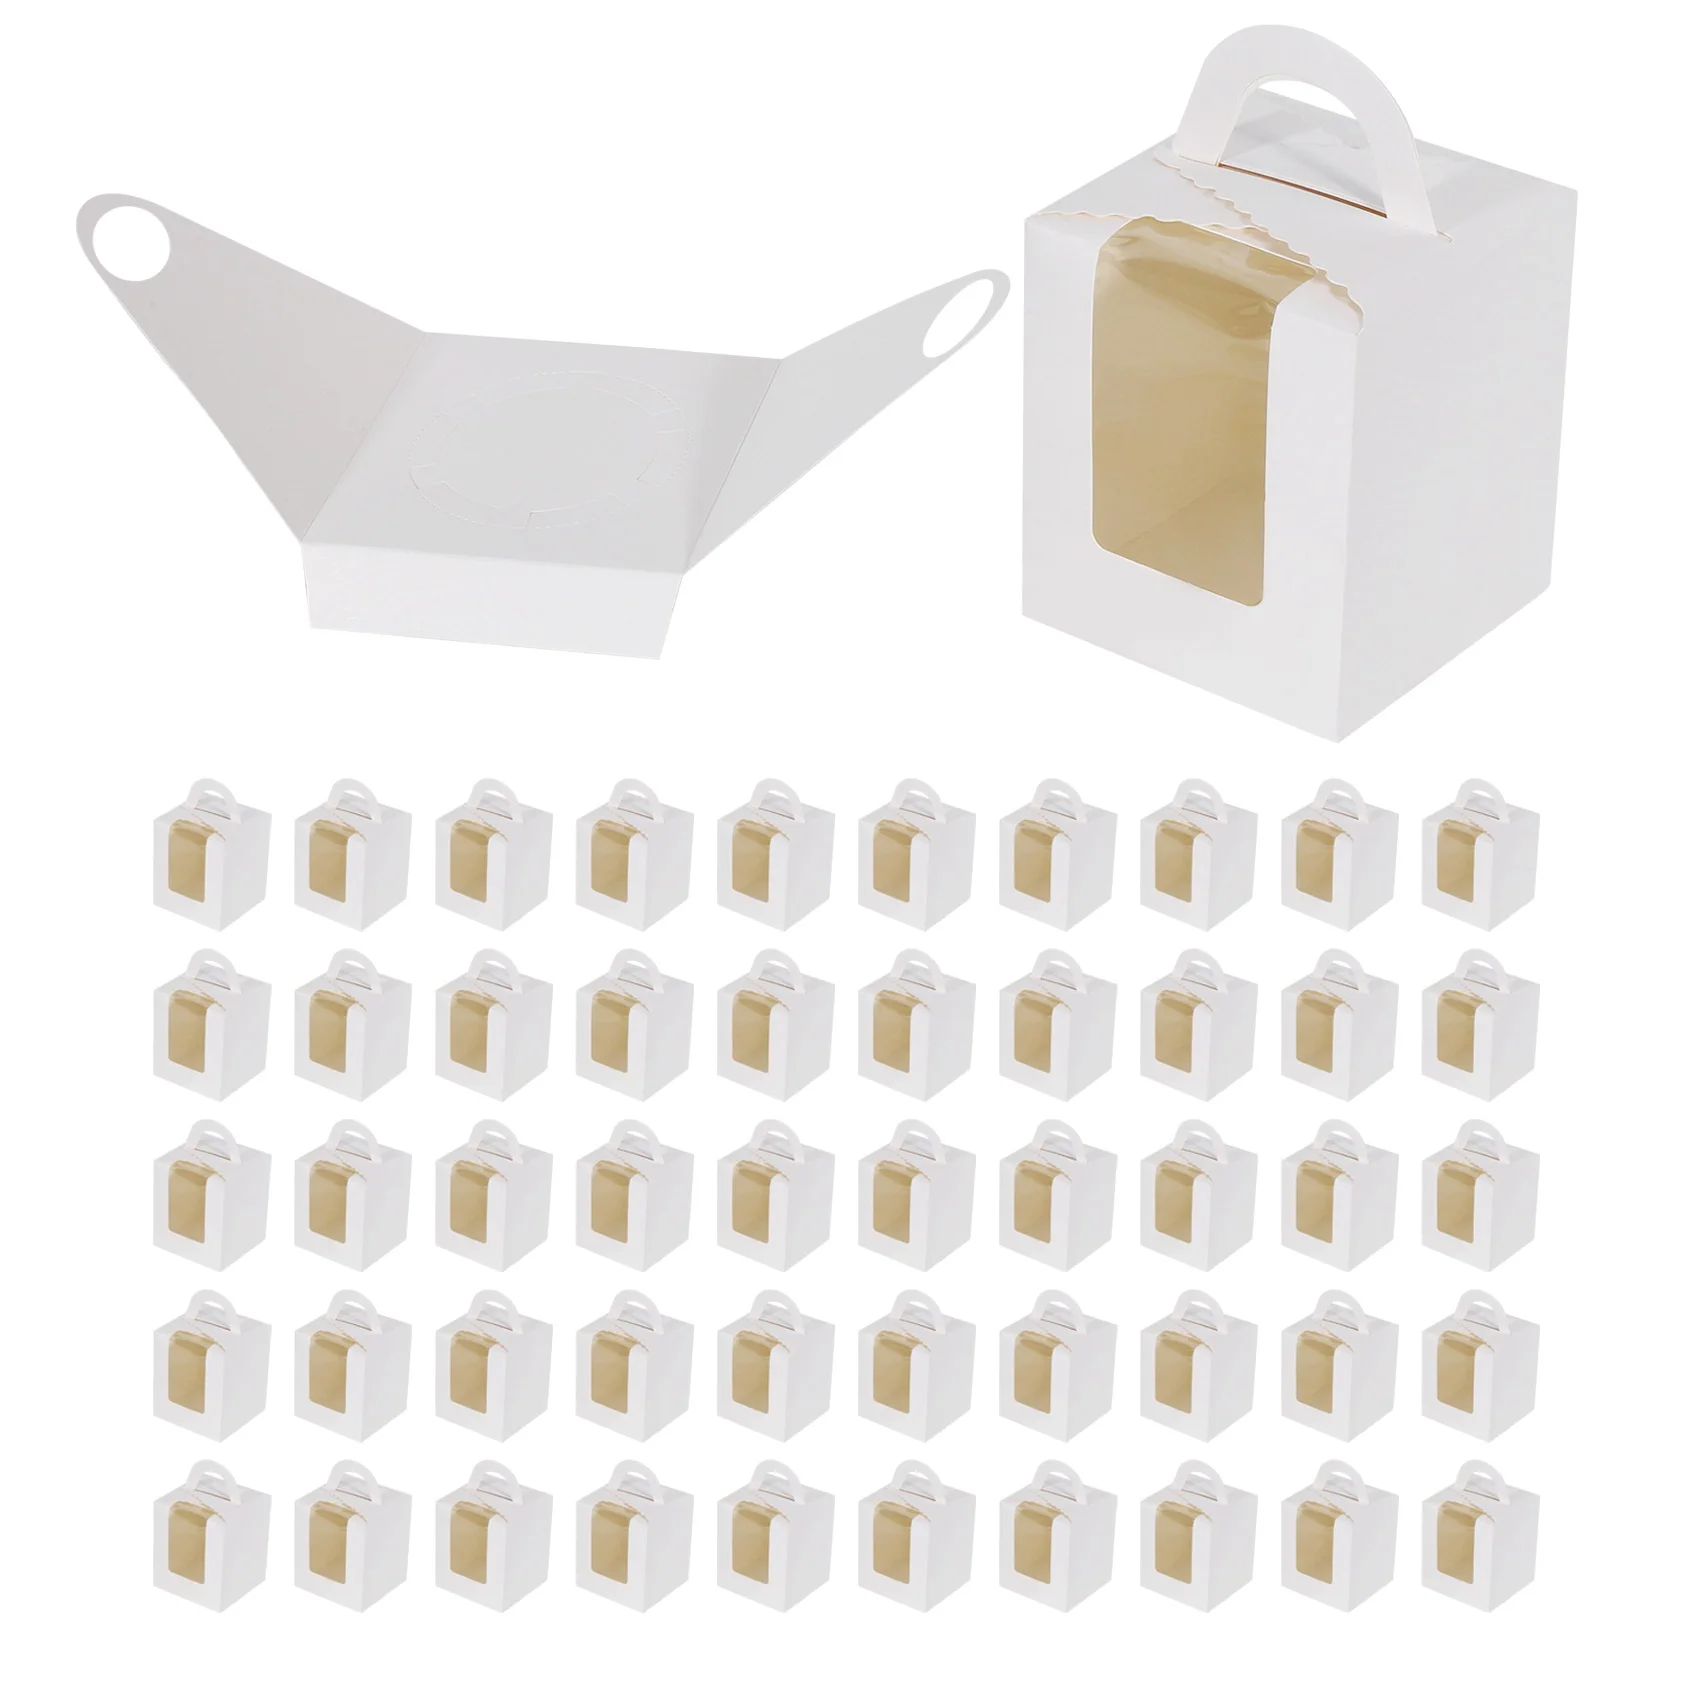 

50 PCS Single Cupcake Boxes White Individual Cupcake Carrier Holders with Window Inserts for Bakery Wrapping Packaging